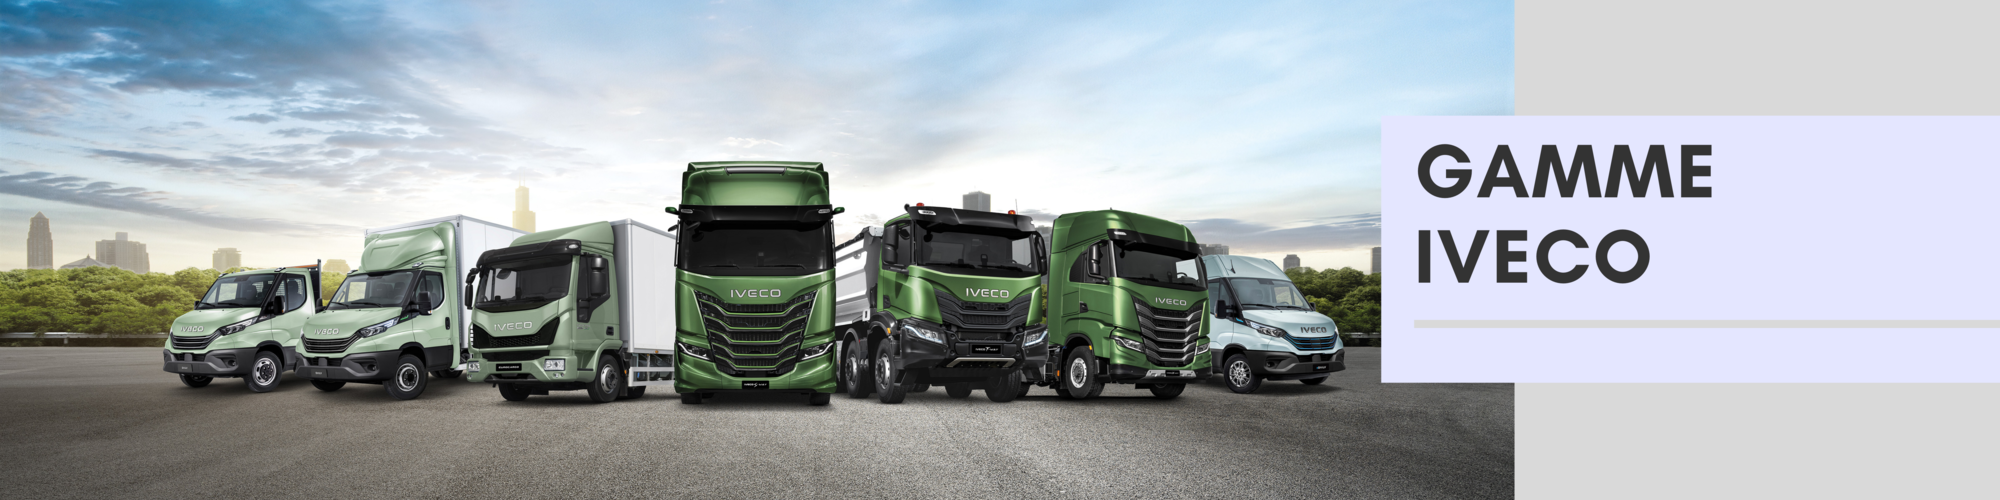 GAMME IVECO